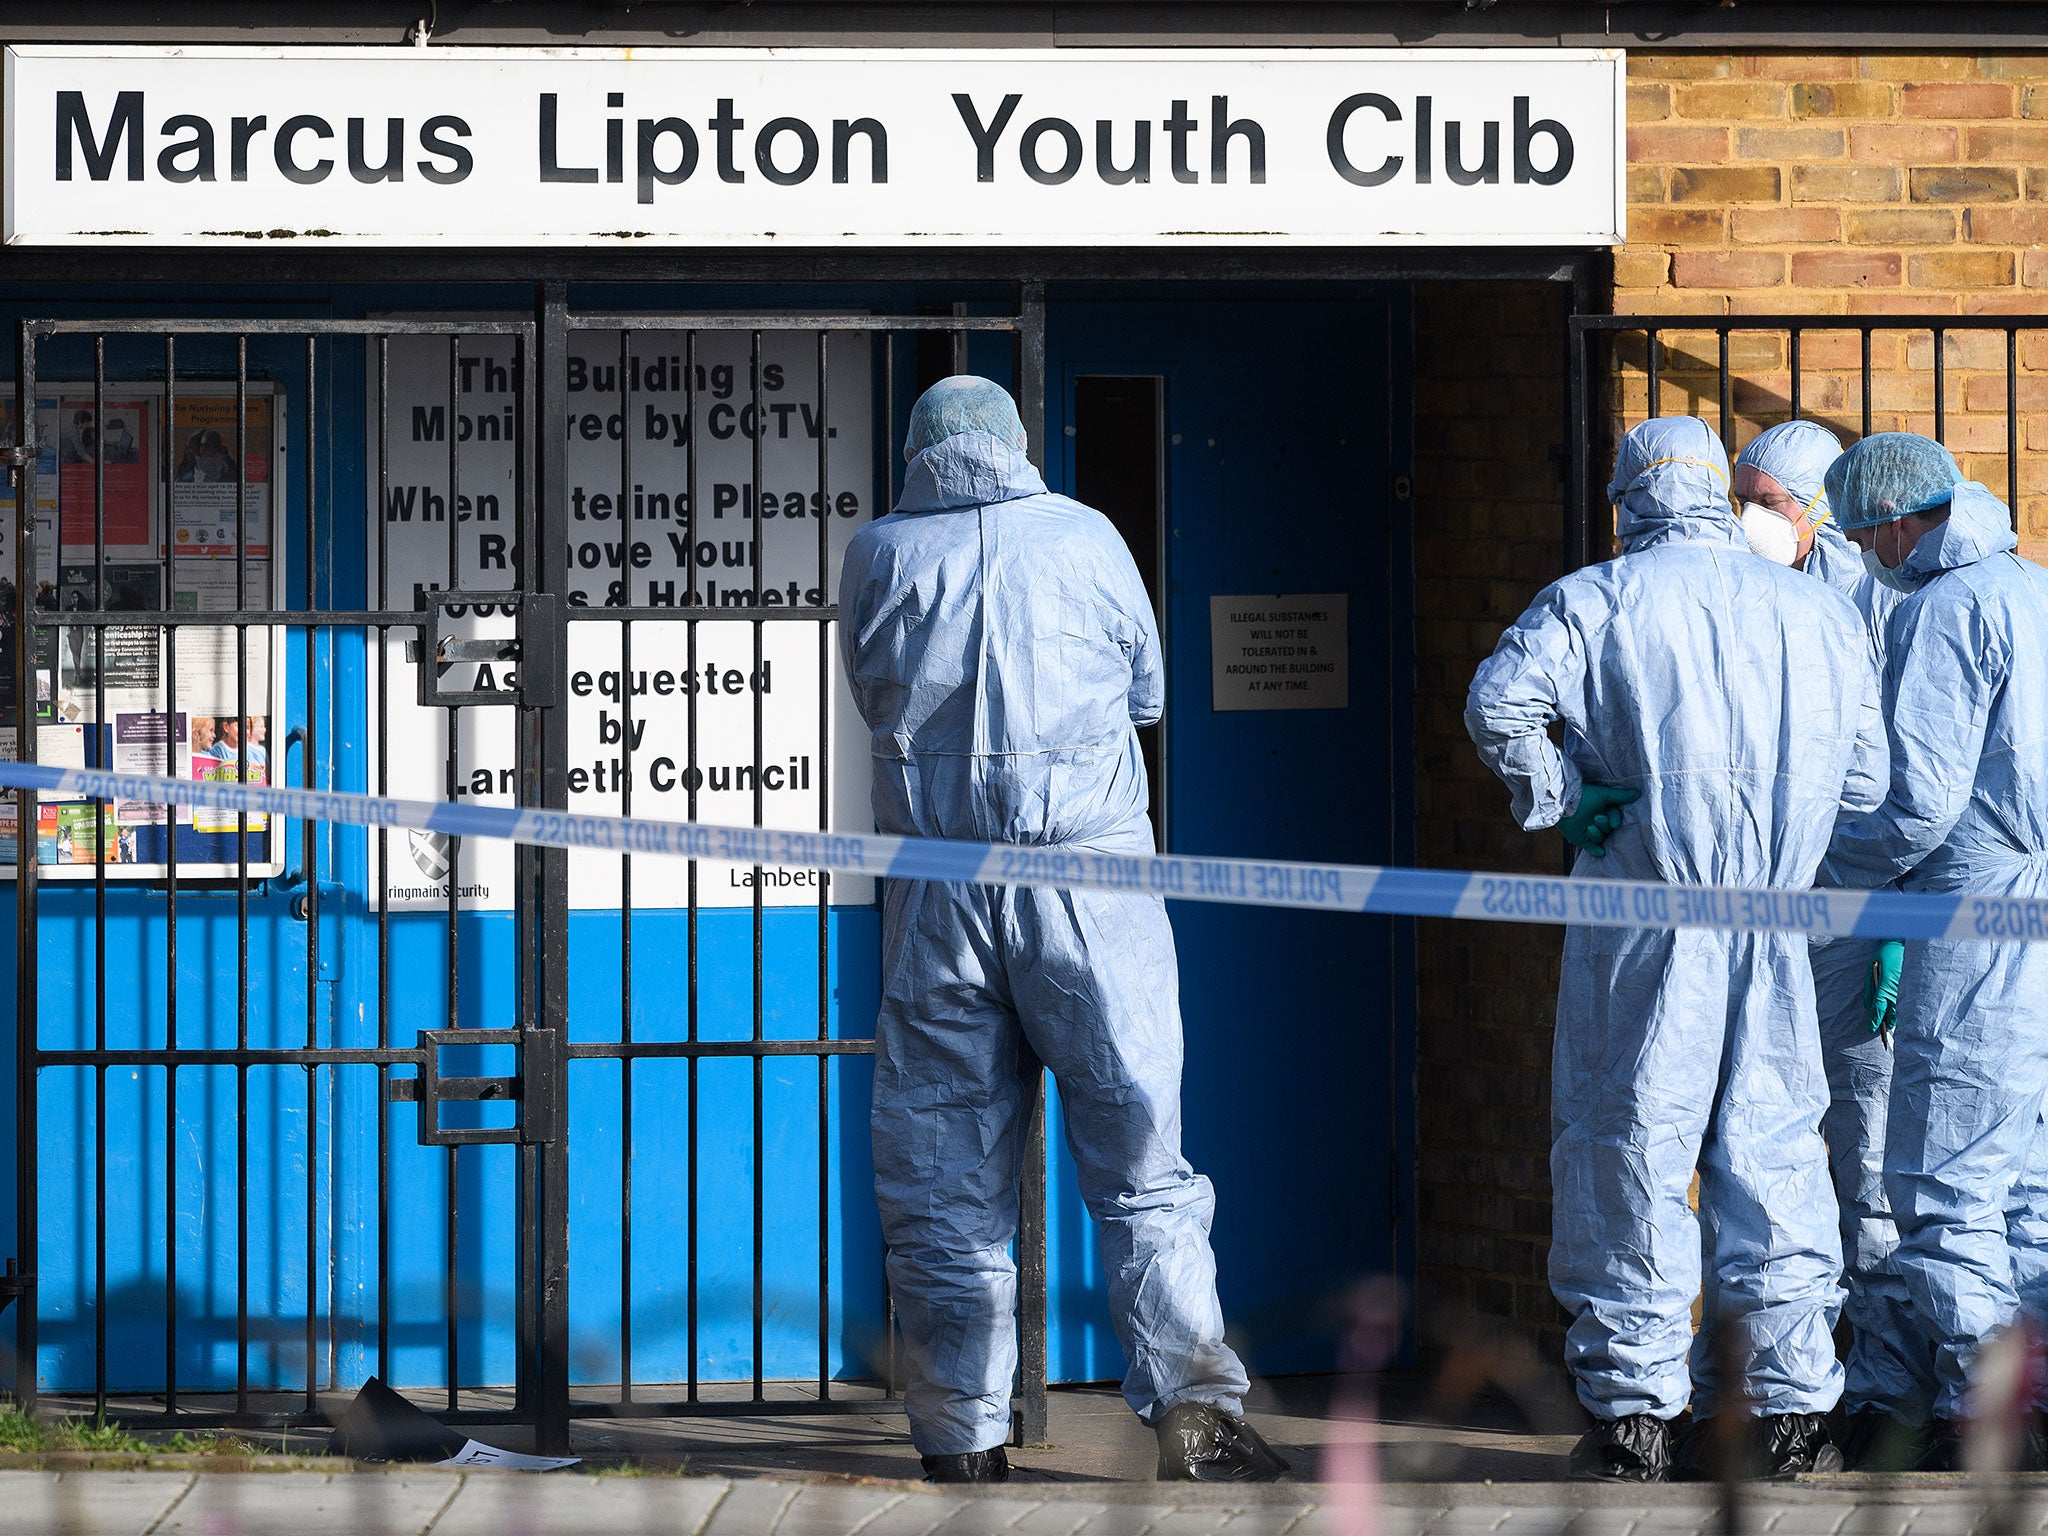 Forensic investigators at the scene of the fatal stabbing last week at Marcus Lipton Youth Club in Brixton